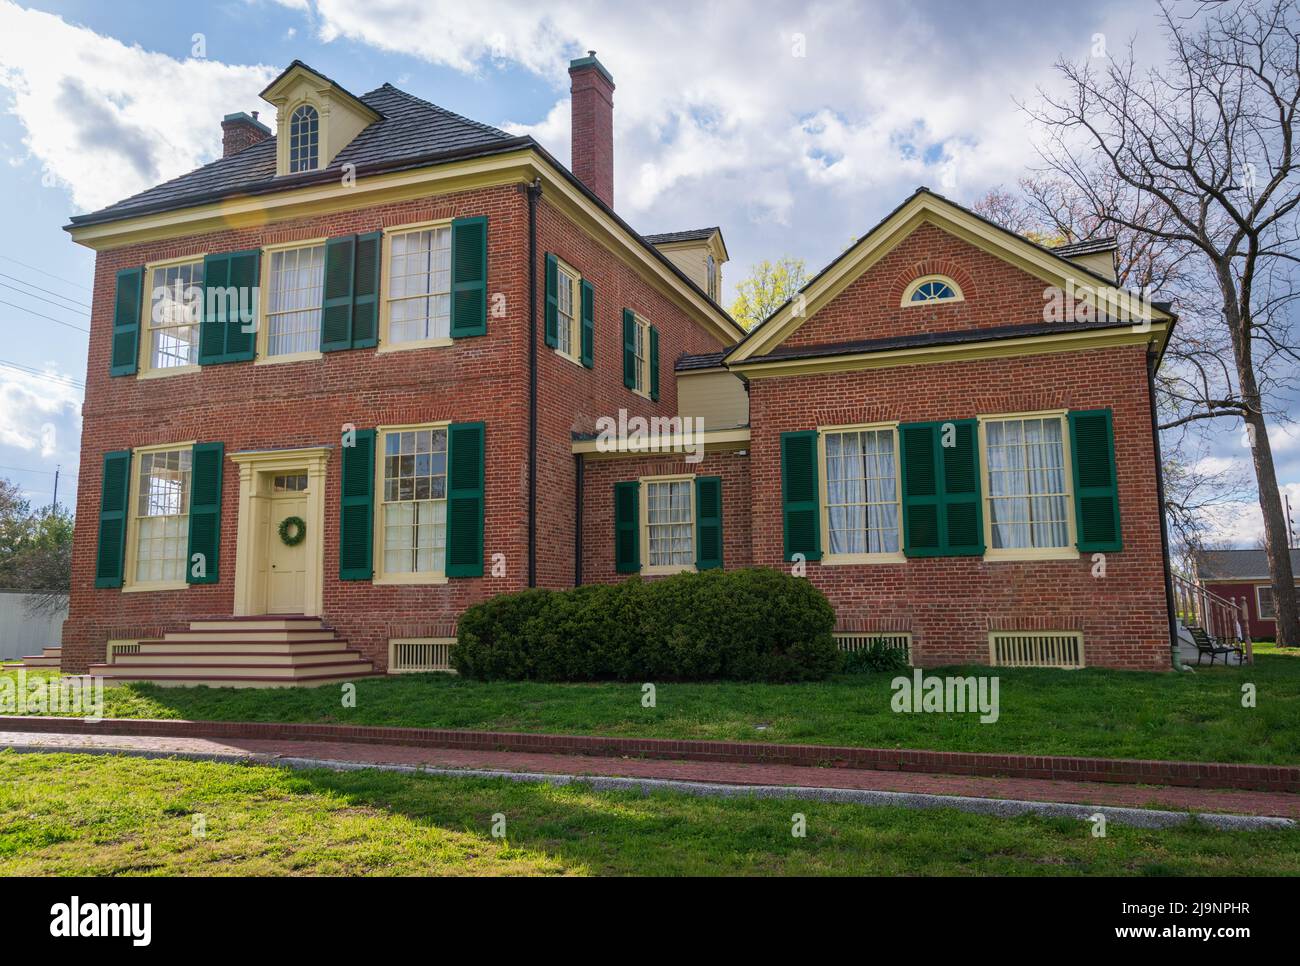 The William Henry Harrison Mansion in Indiana Foto Stock